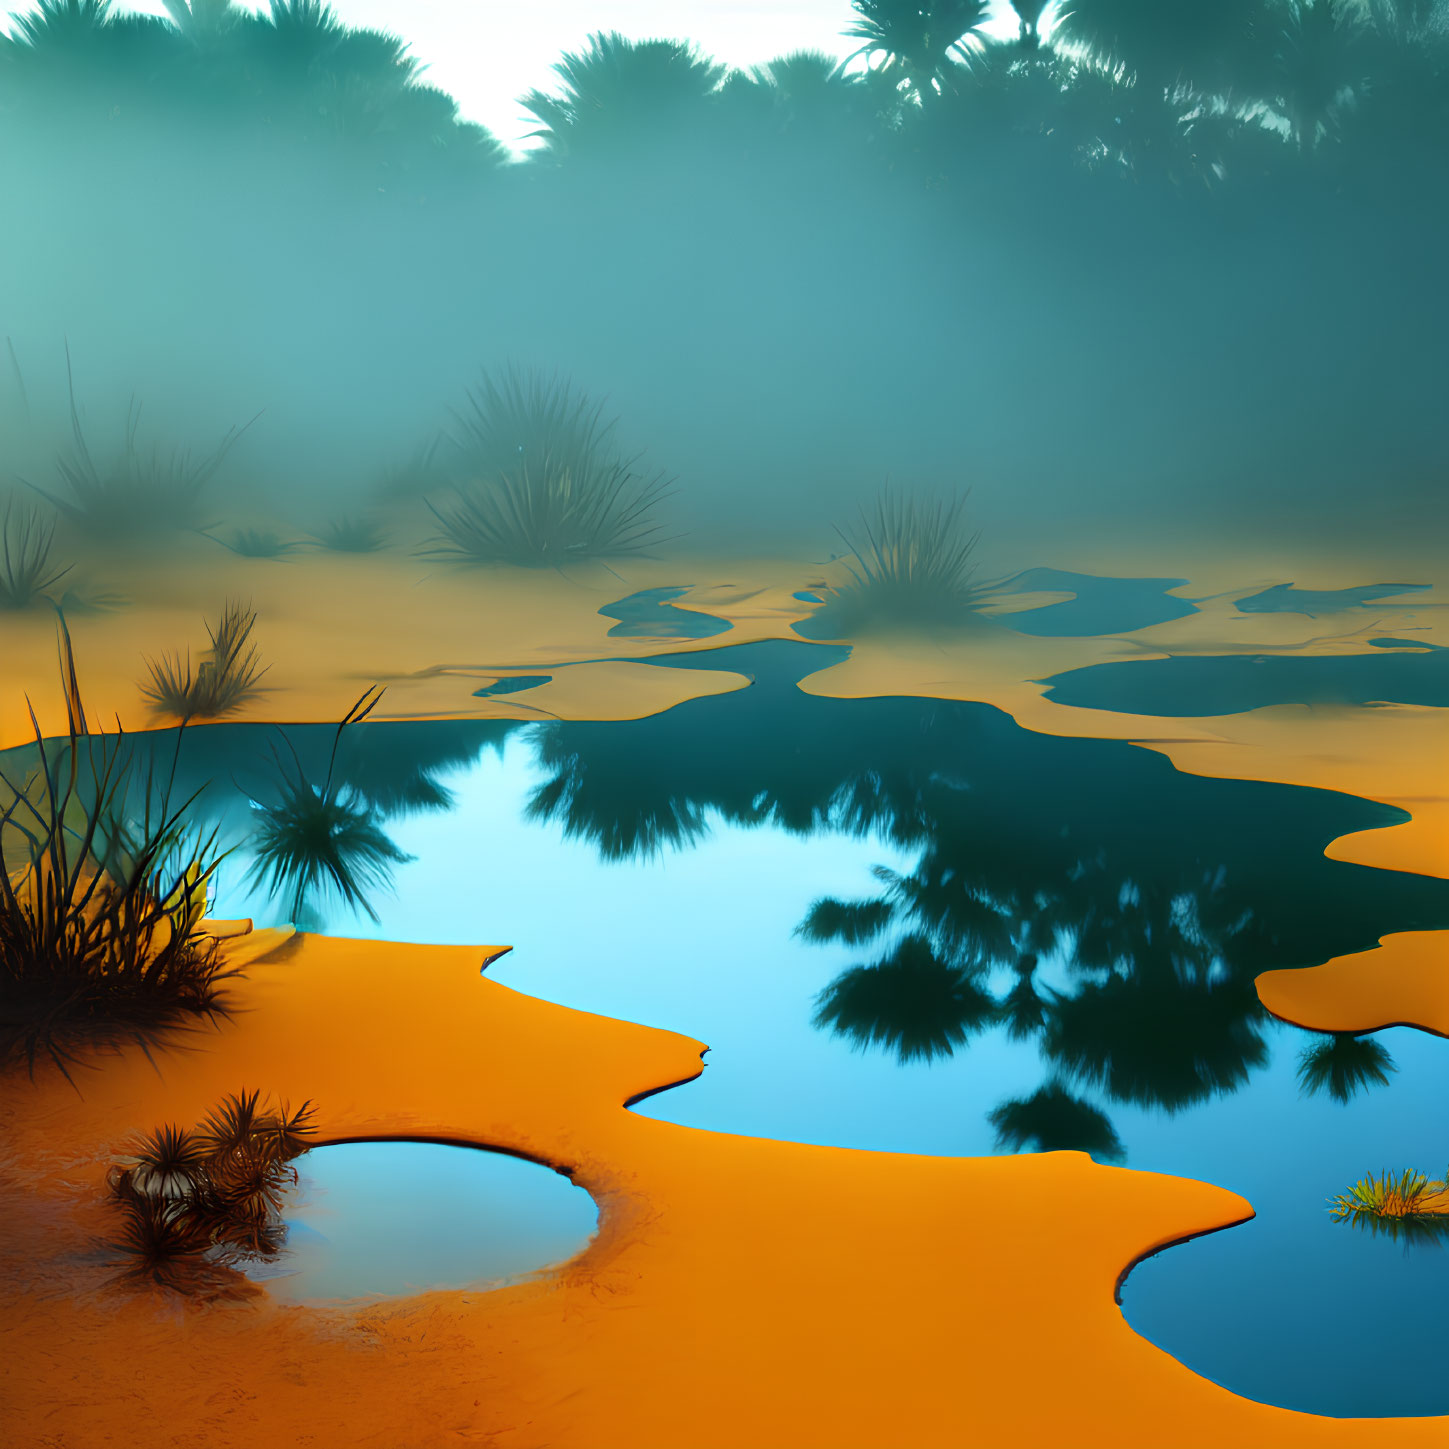 Golden sand, blue water, and green foliage in surreal landscape